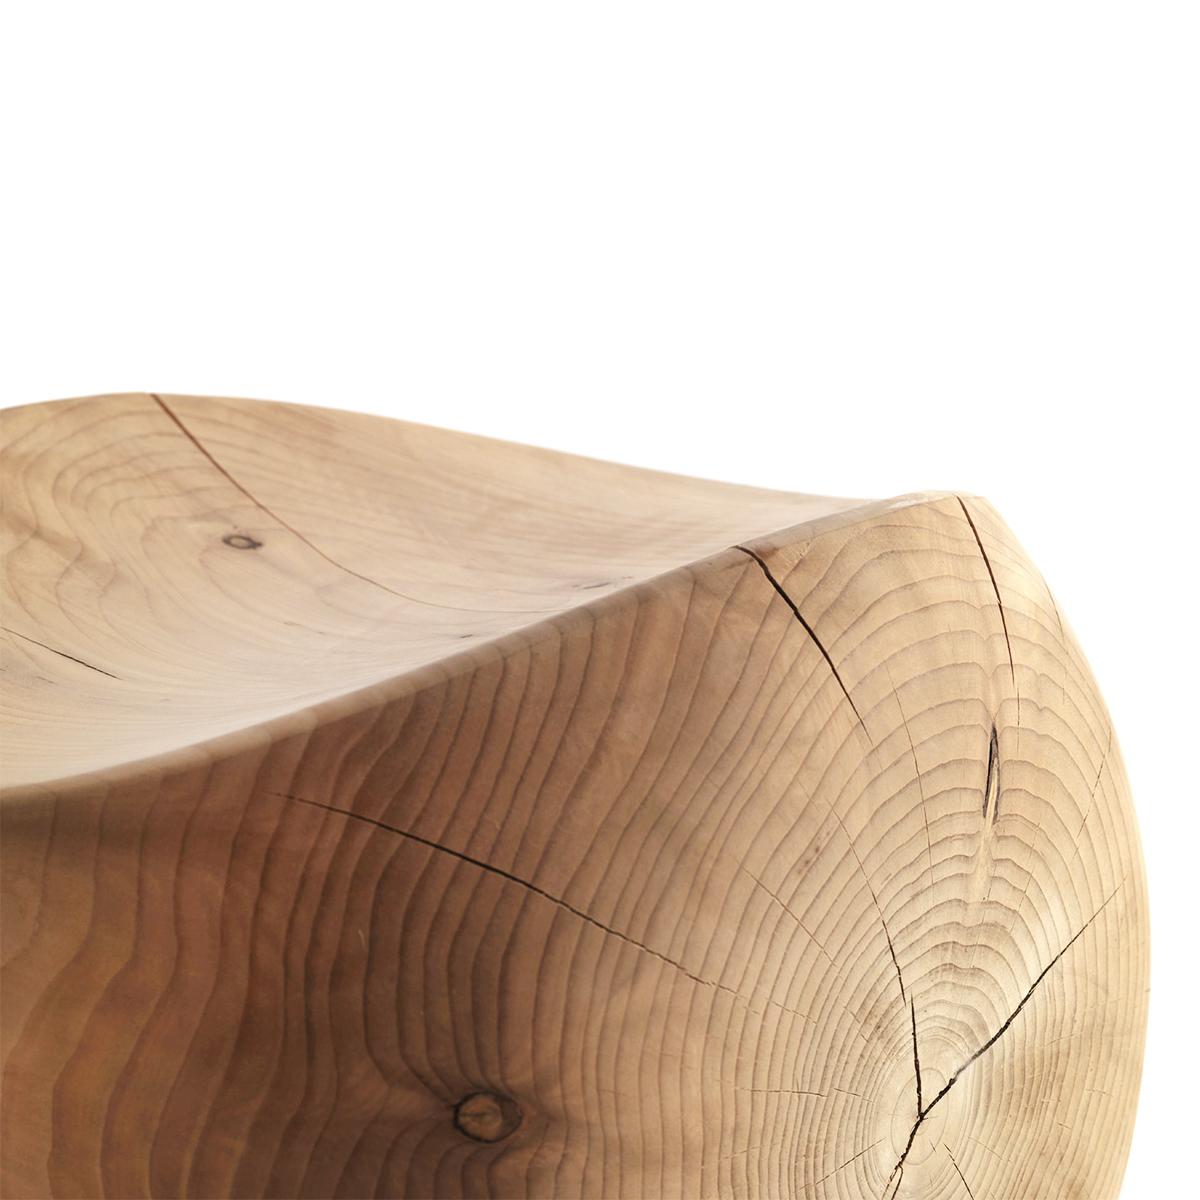 Hand-Carved Cocoona Shape 1 Stool in Solid Cedar For Sale